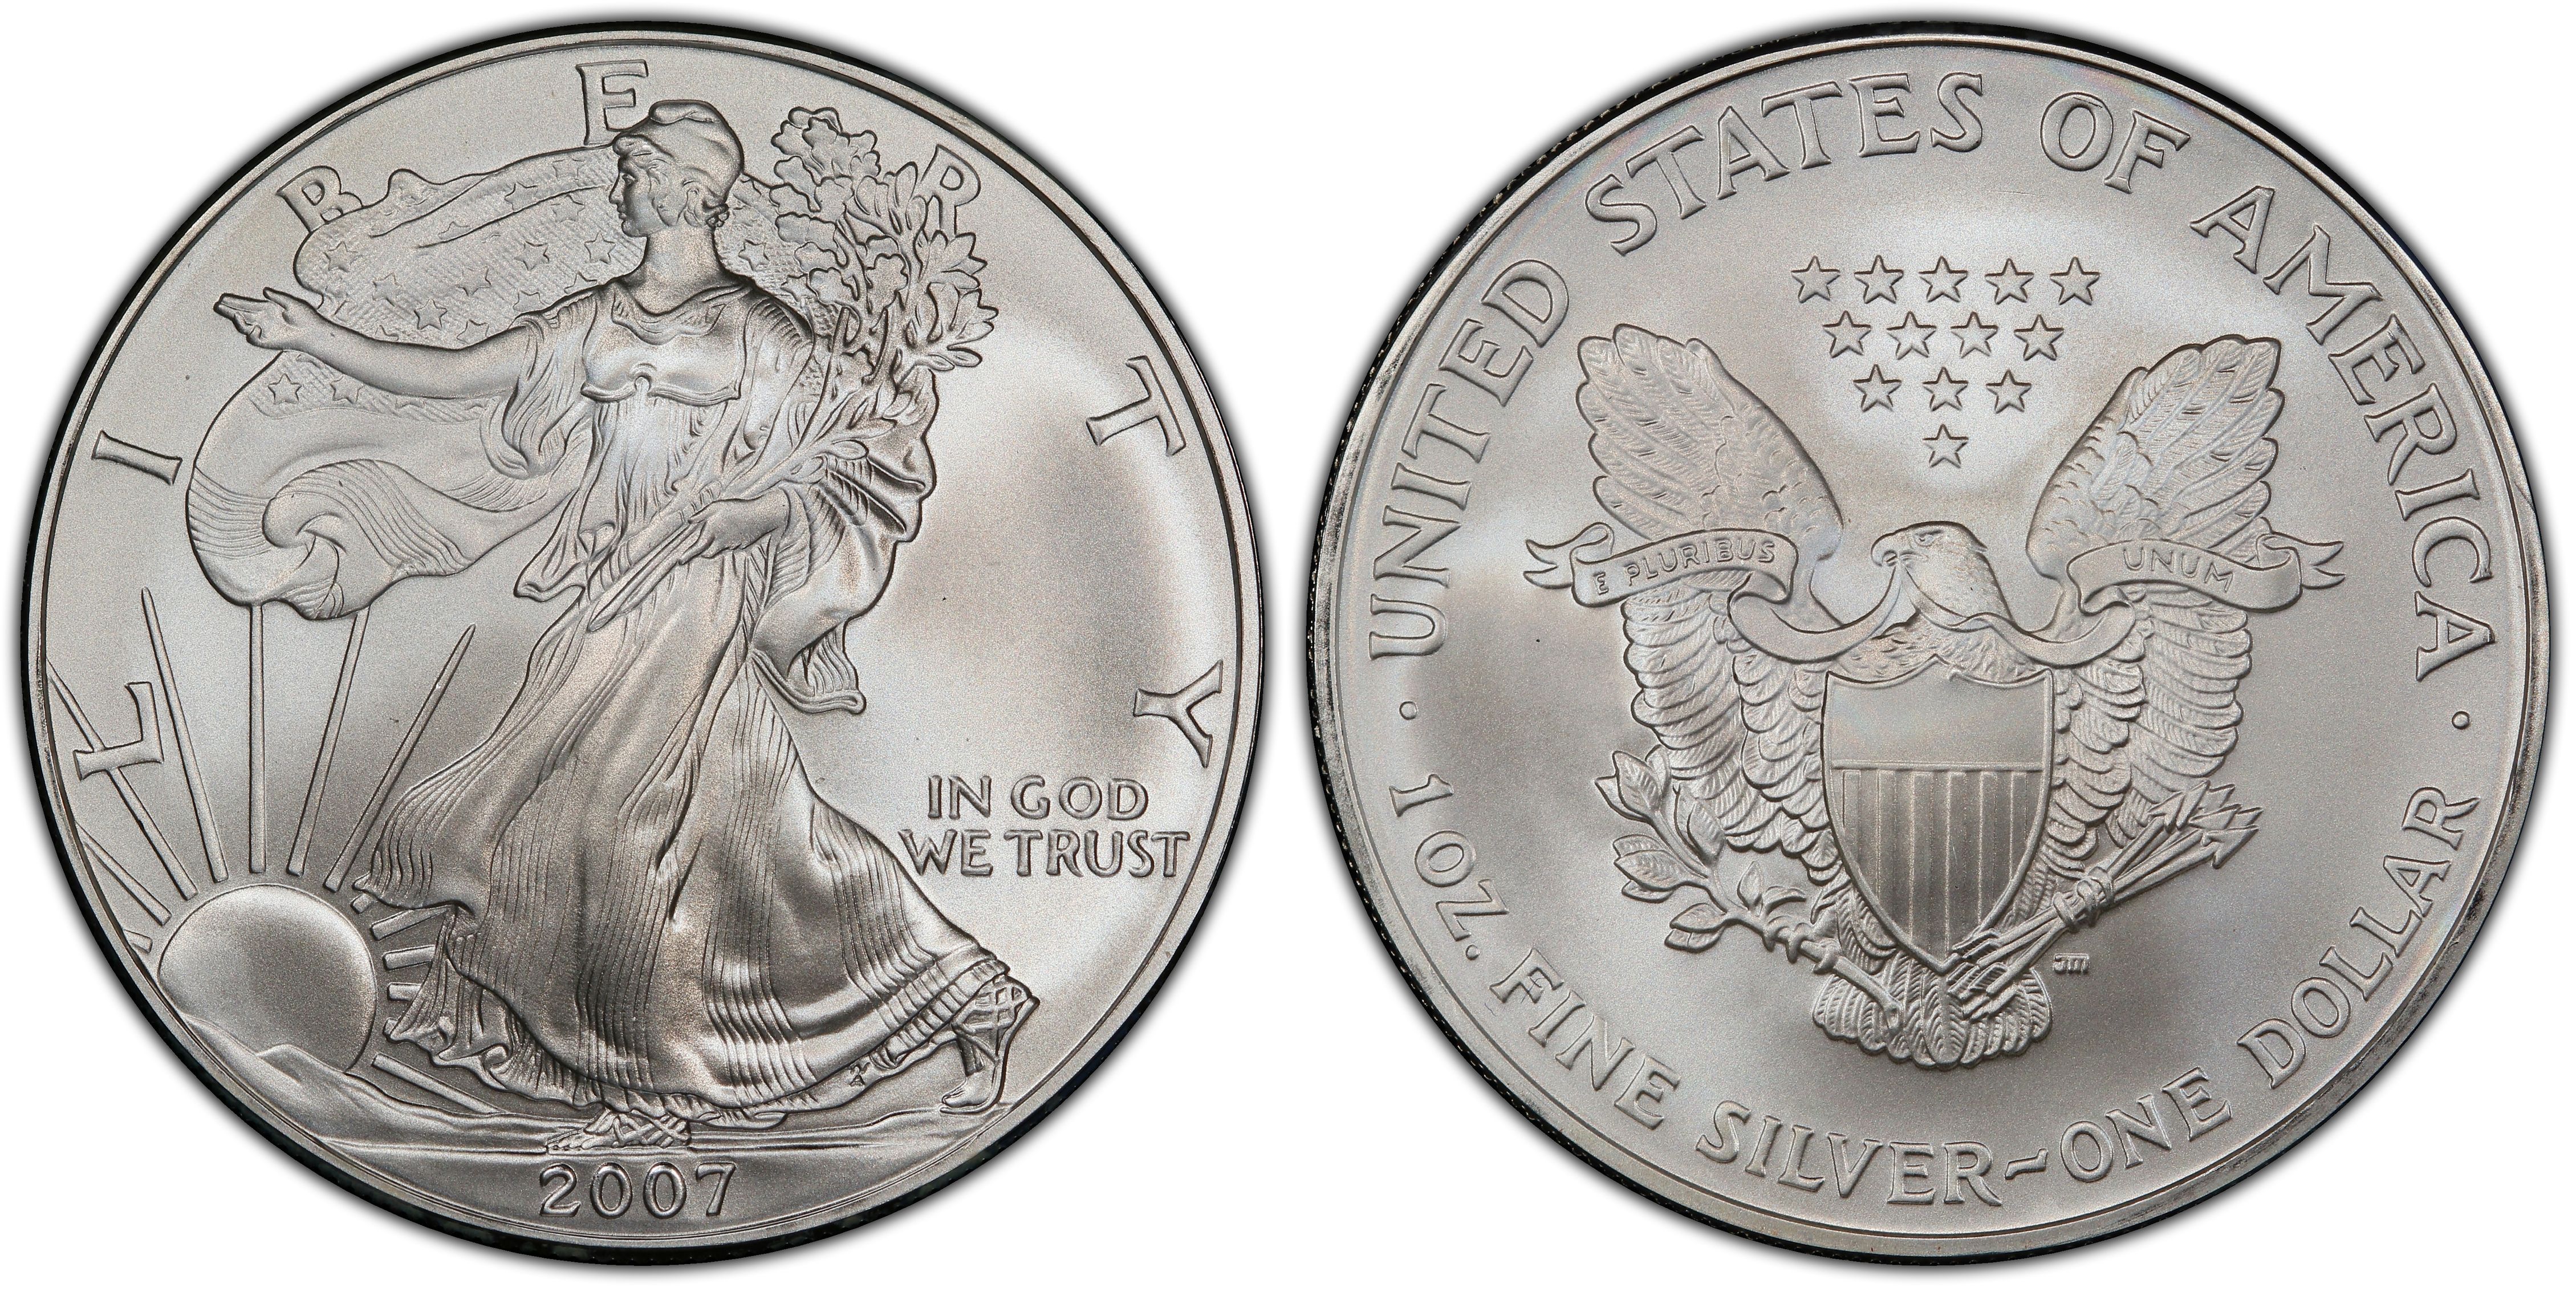 Value of 2007 $1 Silver Coin